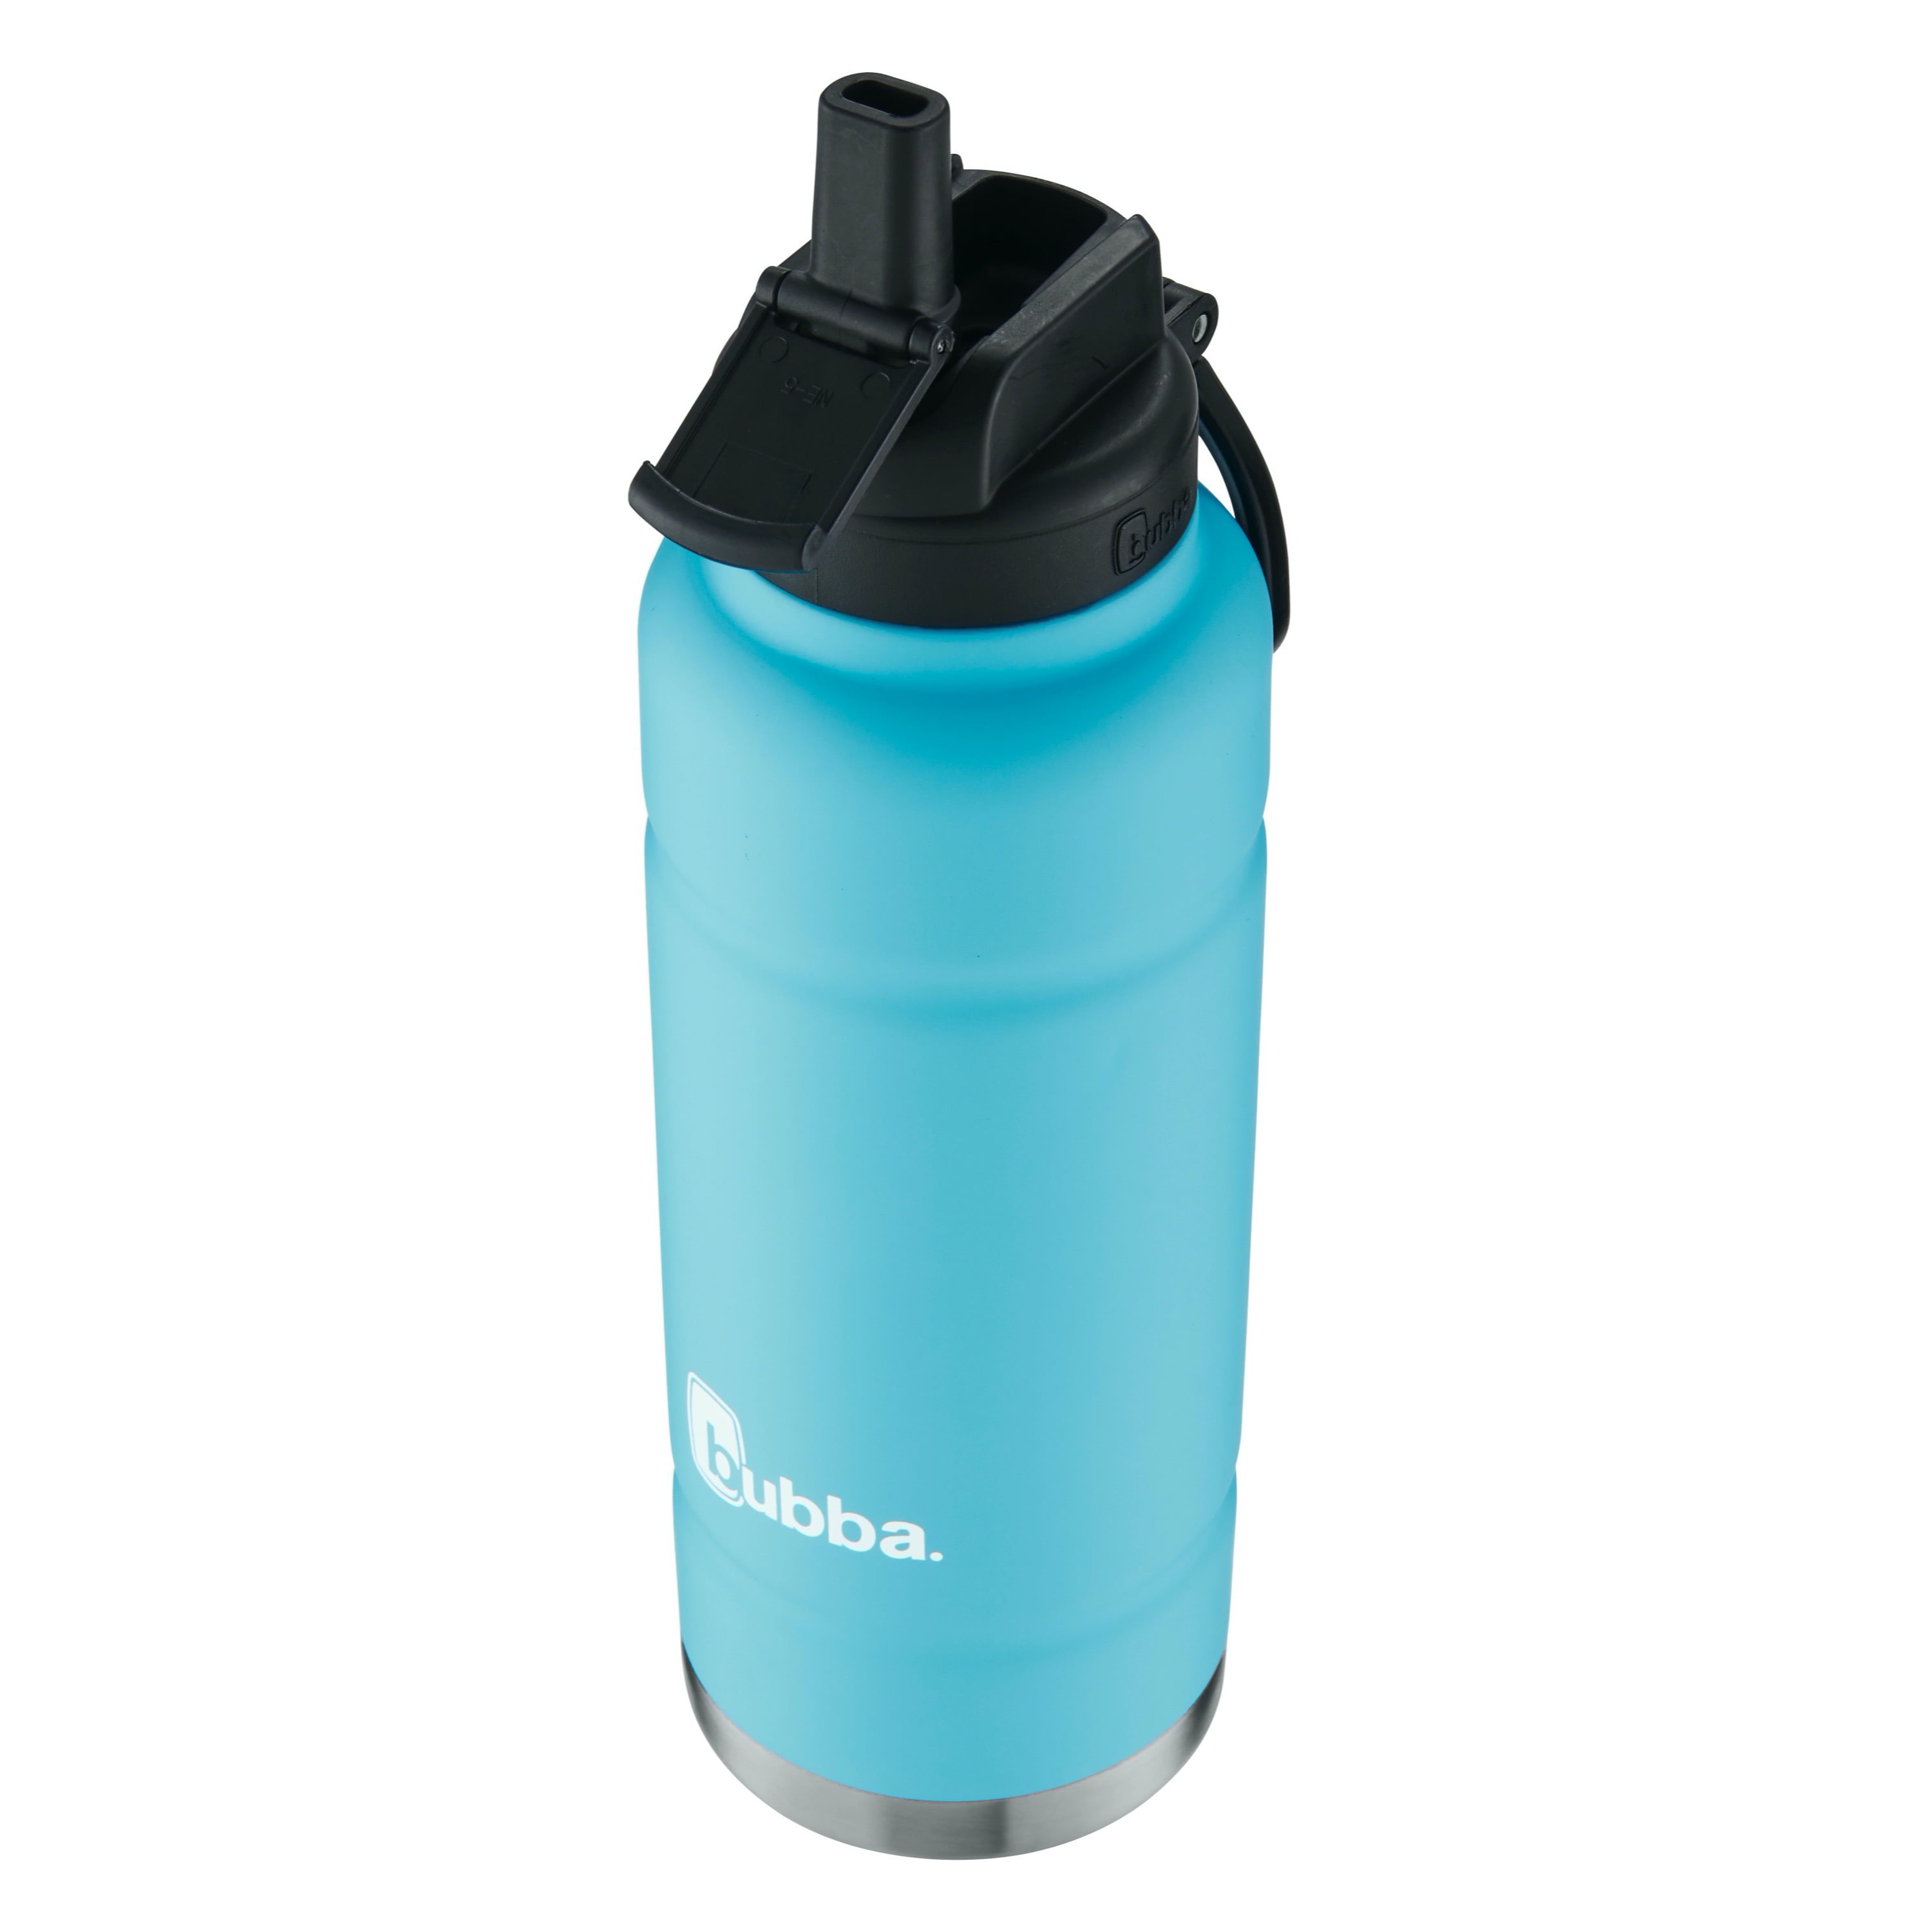 bubba Trailblazer Stainless Steel Water Bottle with Wide Mouth Lid  Licorice, 40 fl oz. - Walmart.com